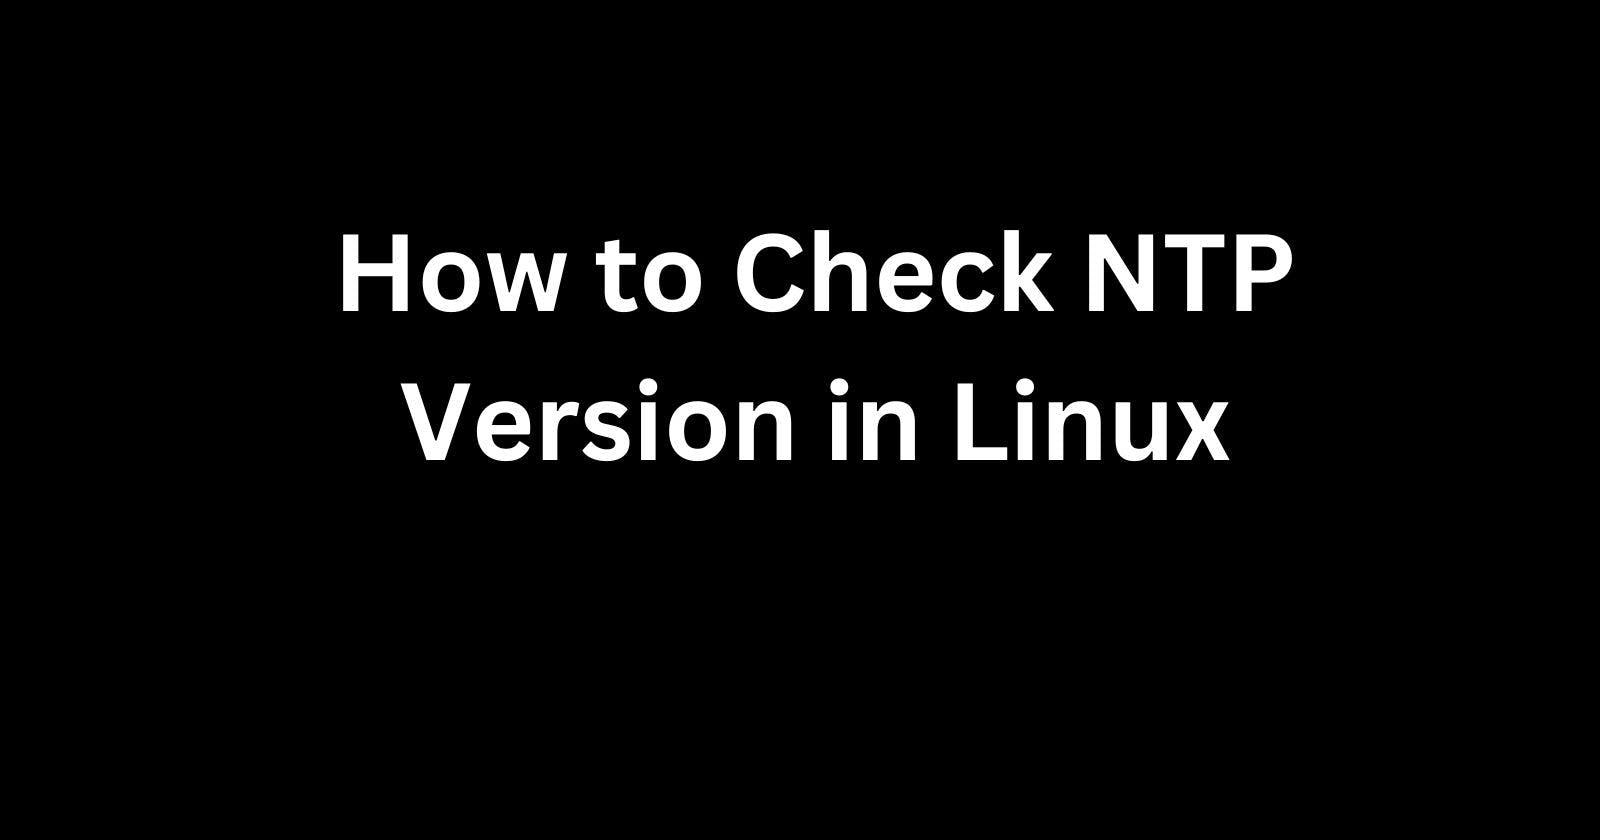 How to Check NTP Version in Linux